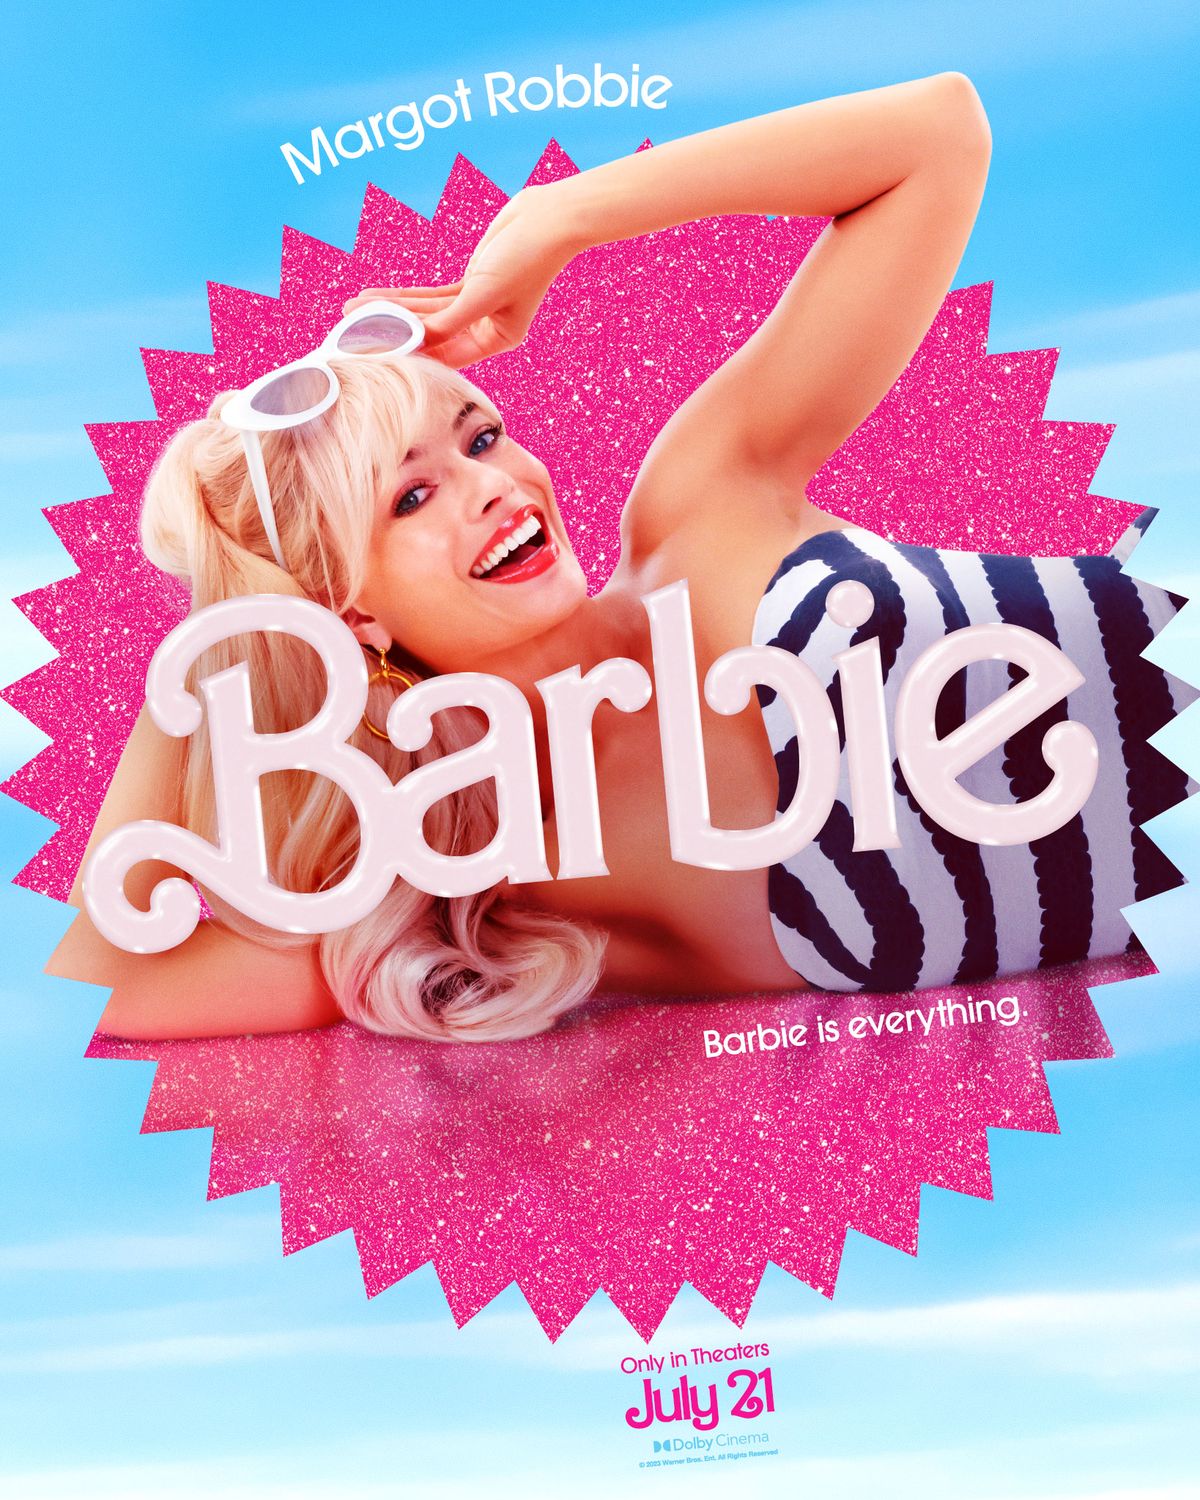 Barbie is everything.